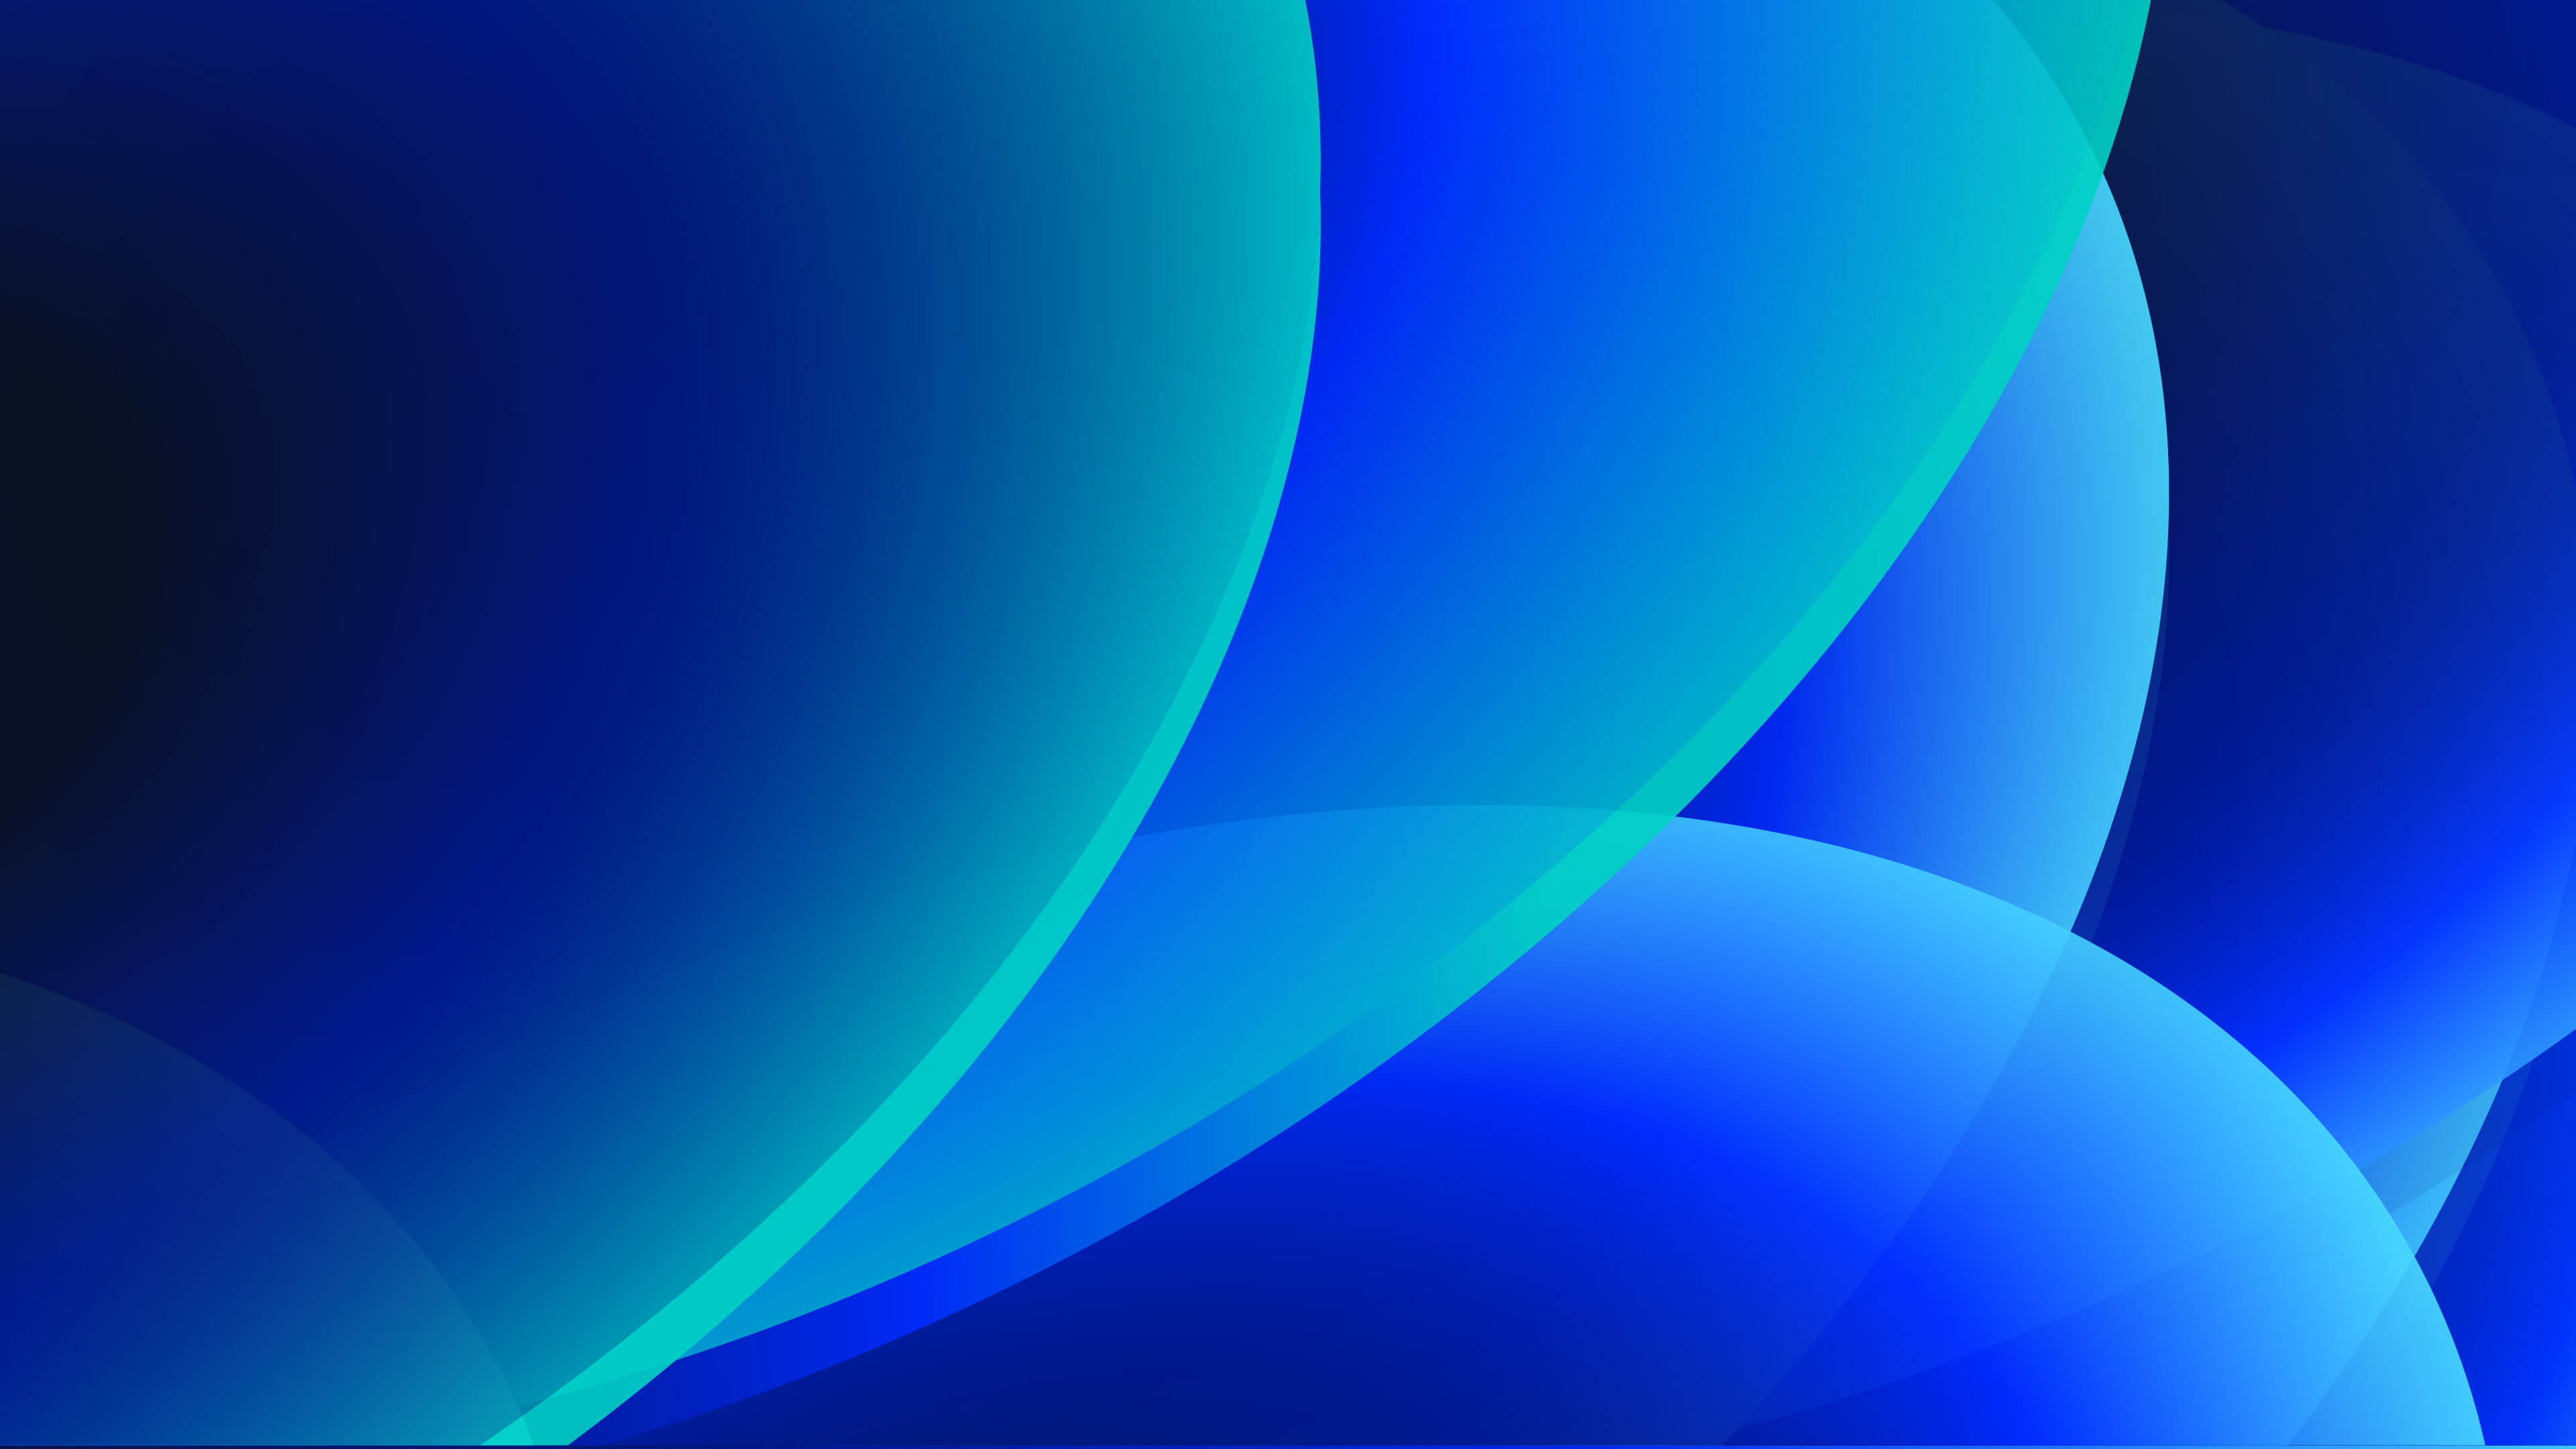 Angular geometric pattern with a blue gradient background